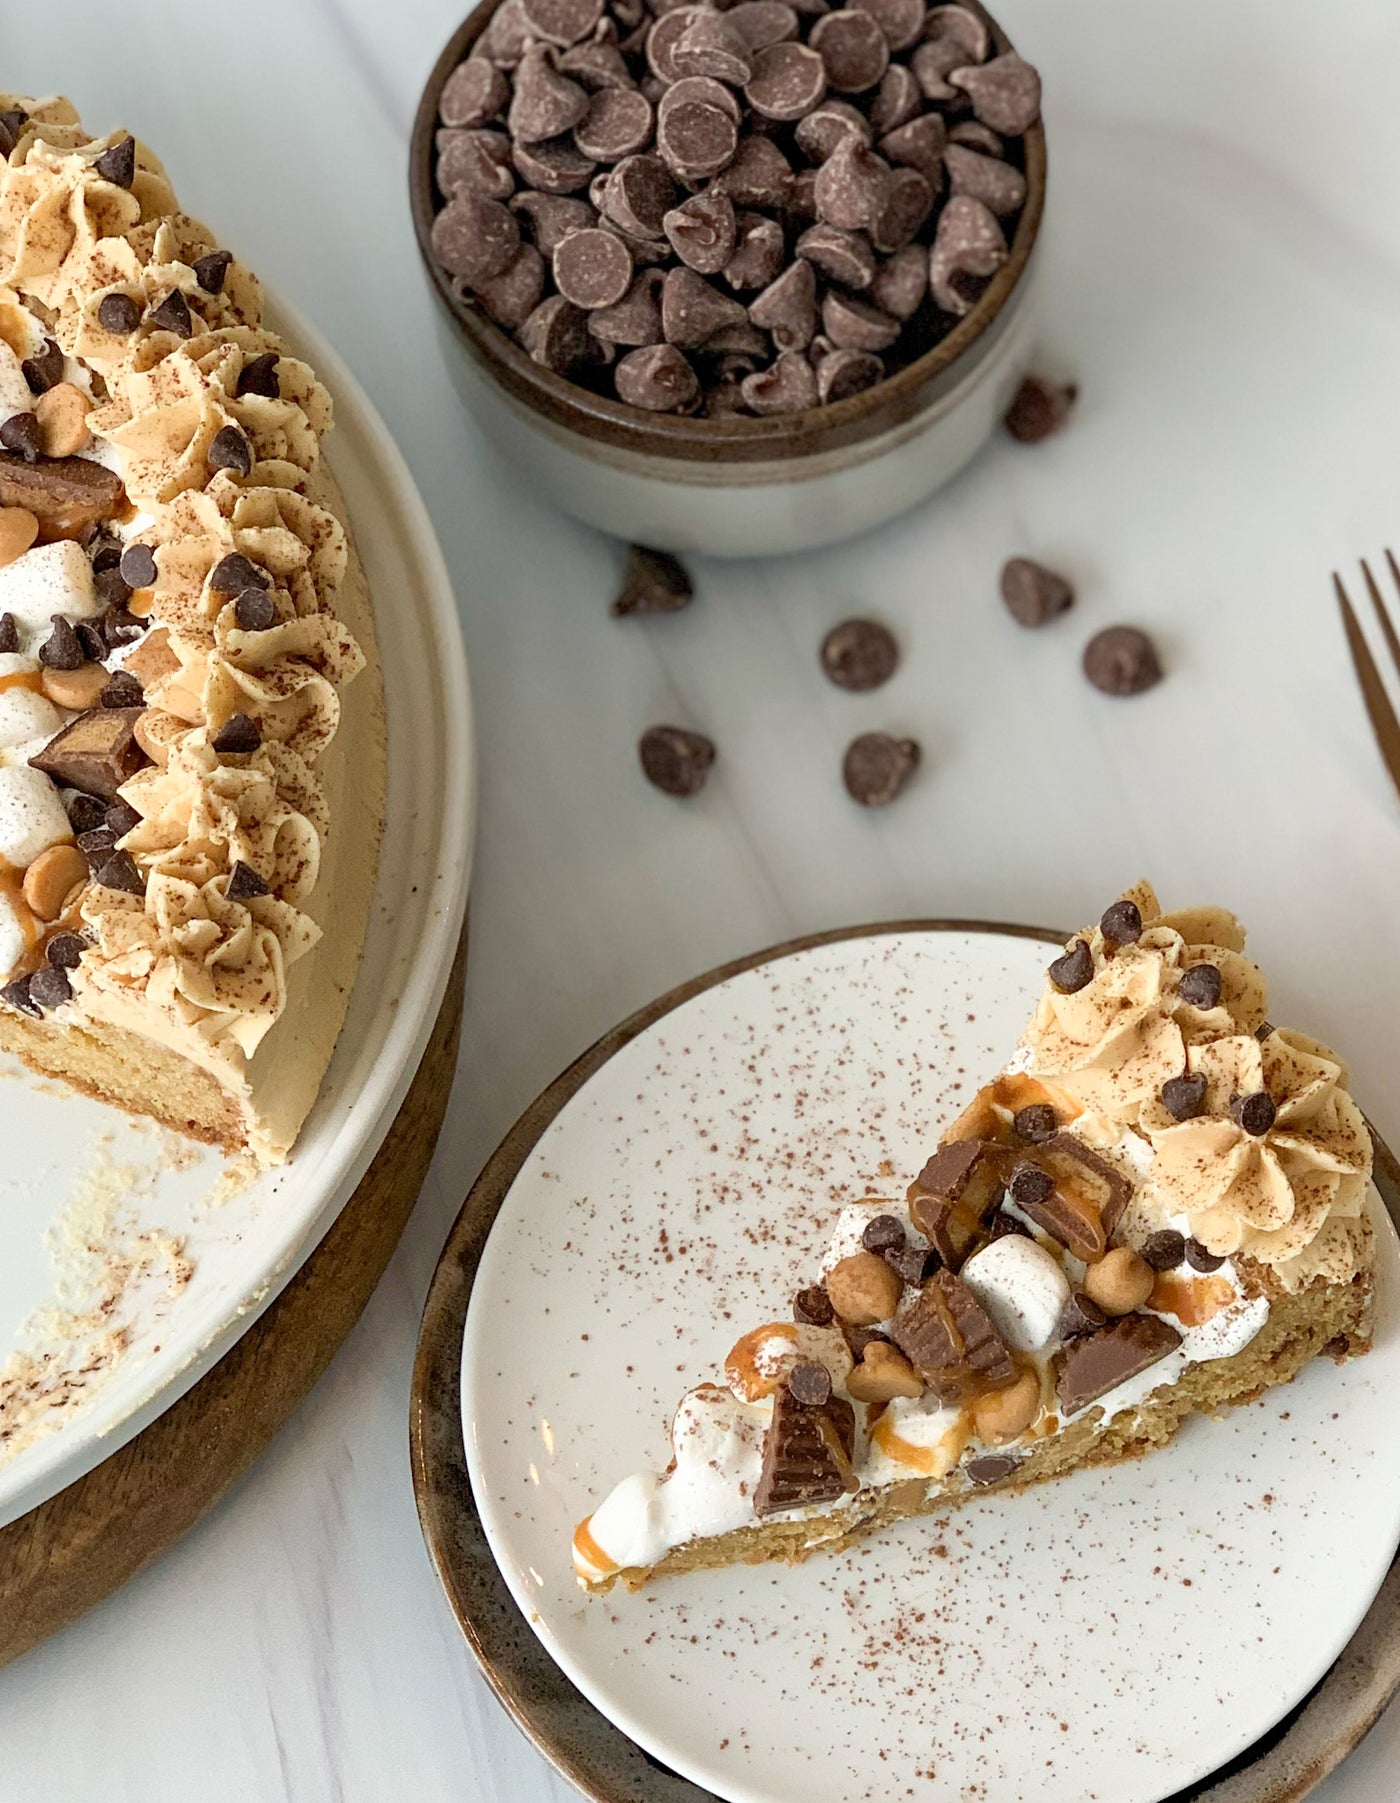 Over the Top Peanut Butter Chocolate Chip Cookie Cake